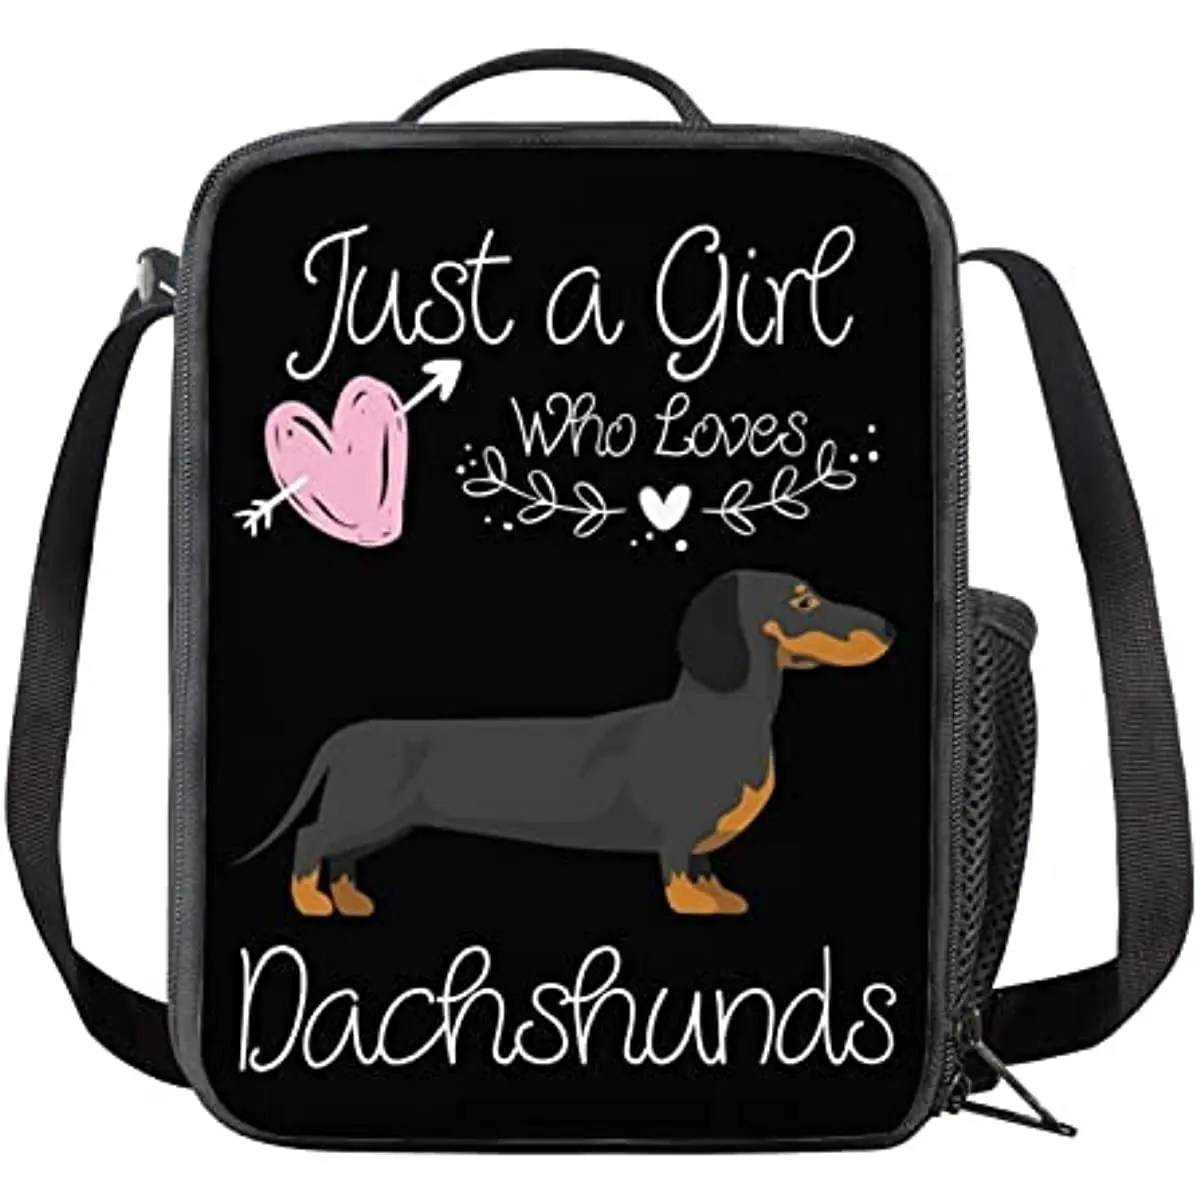 

Just A Girl Who Loves Dachshunds Kids Lunch Bag Insulated Tote Meal Pack Cartoon Lunch Box for Girls Boys with Shoulder Strap